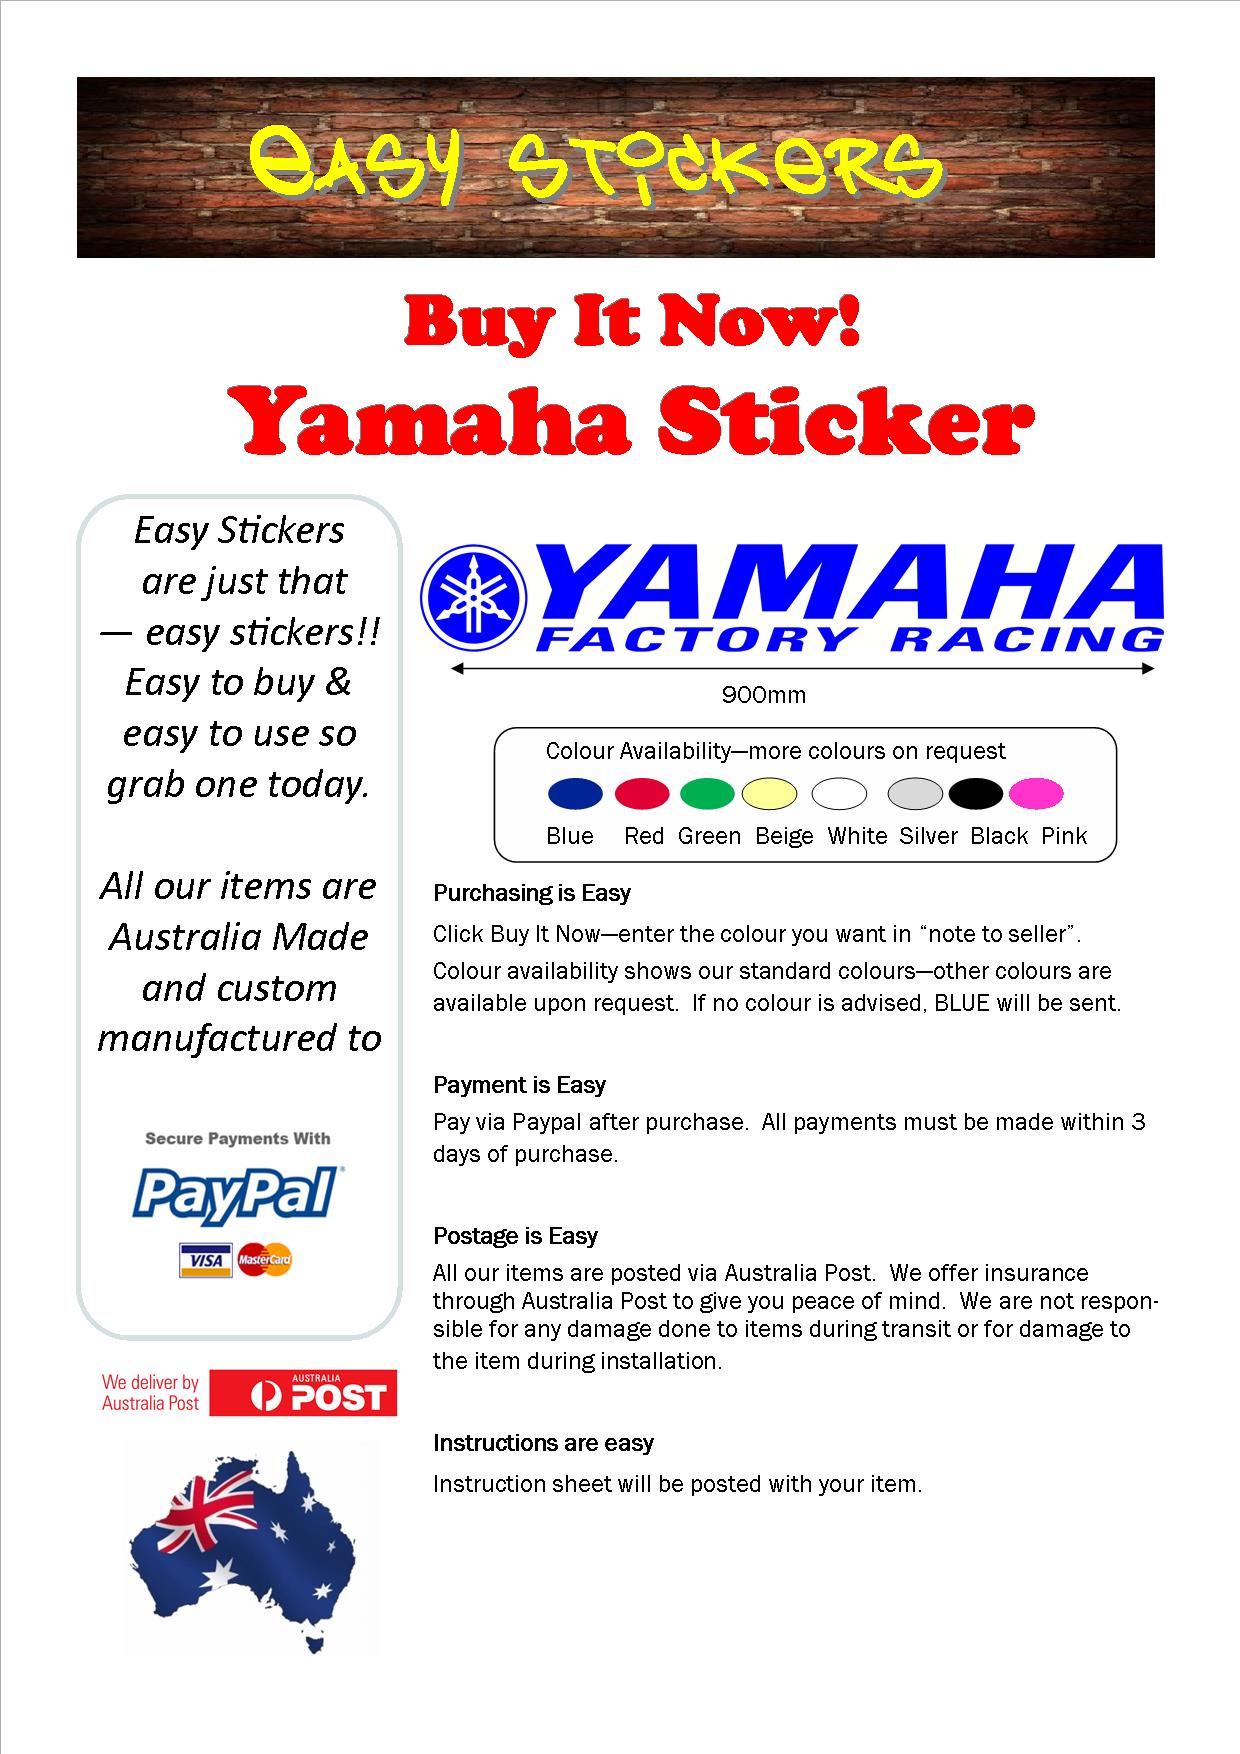 Ebay Template 900mm Yamaha.jpg  by easystickers